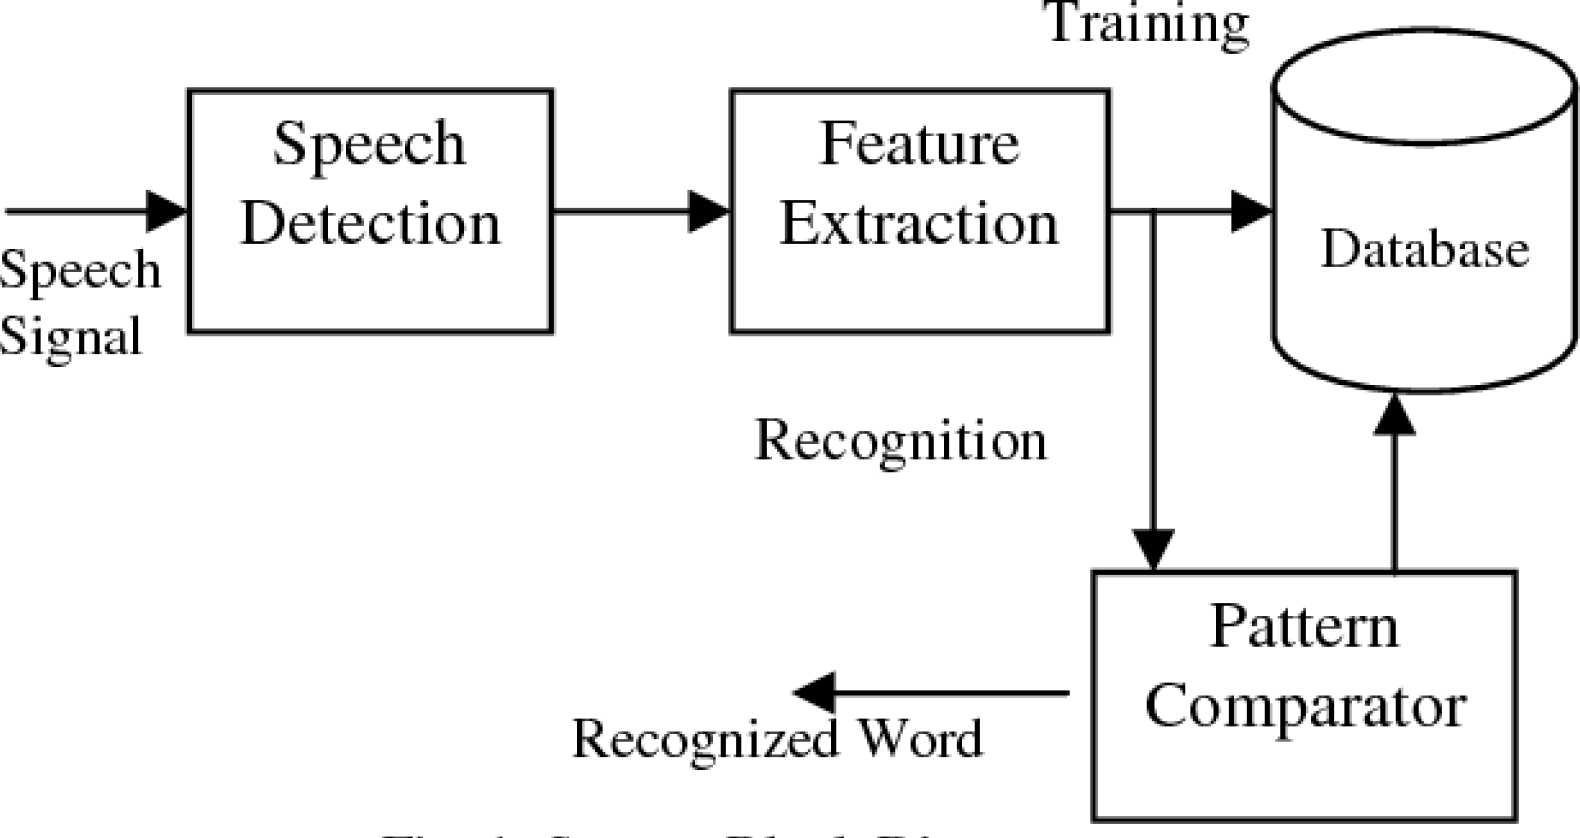 Dynamic time warping is a popular technique for aligning sequences in speech recognition. Discover how this technique is used to build accurate speech recognition models and see it in action in this image.